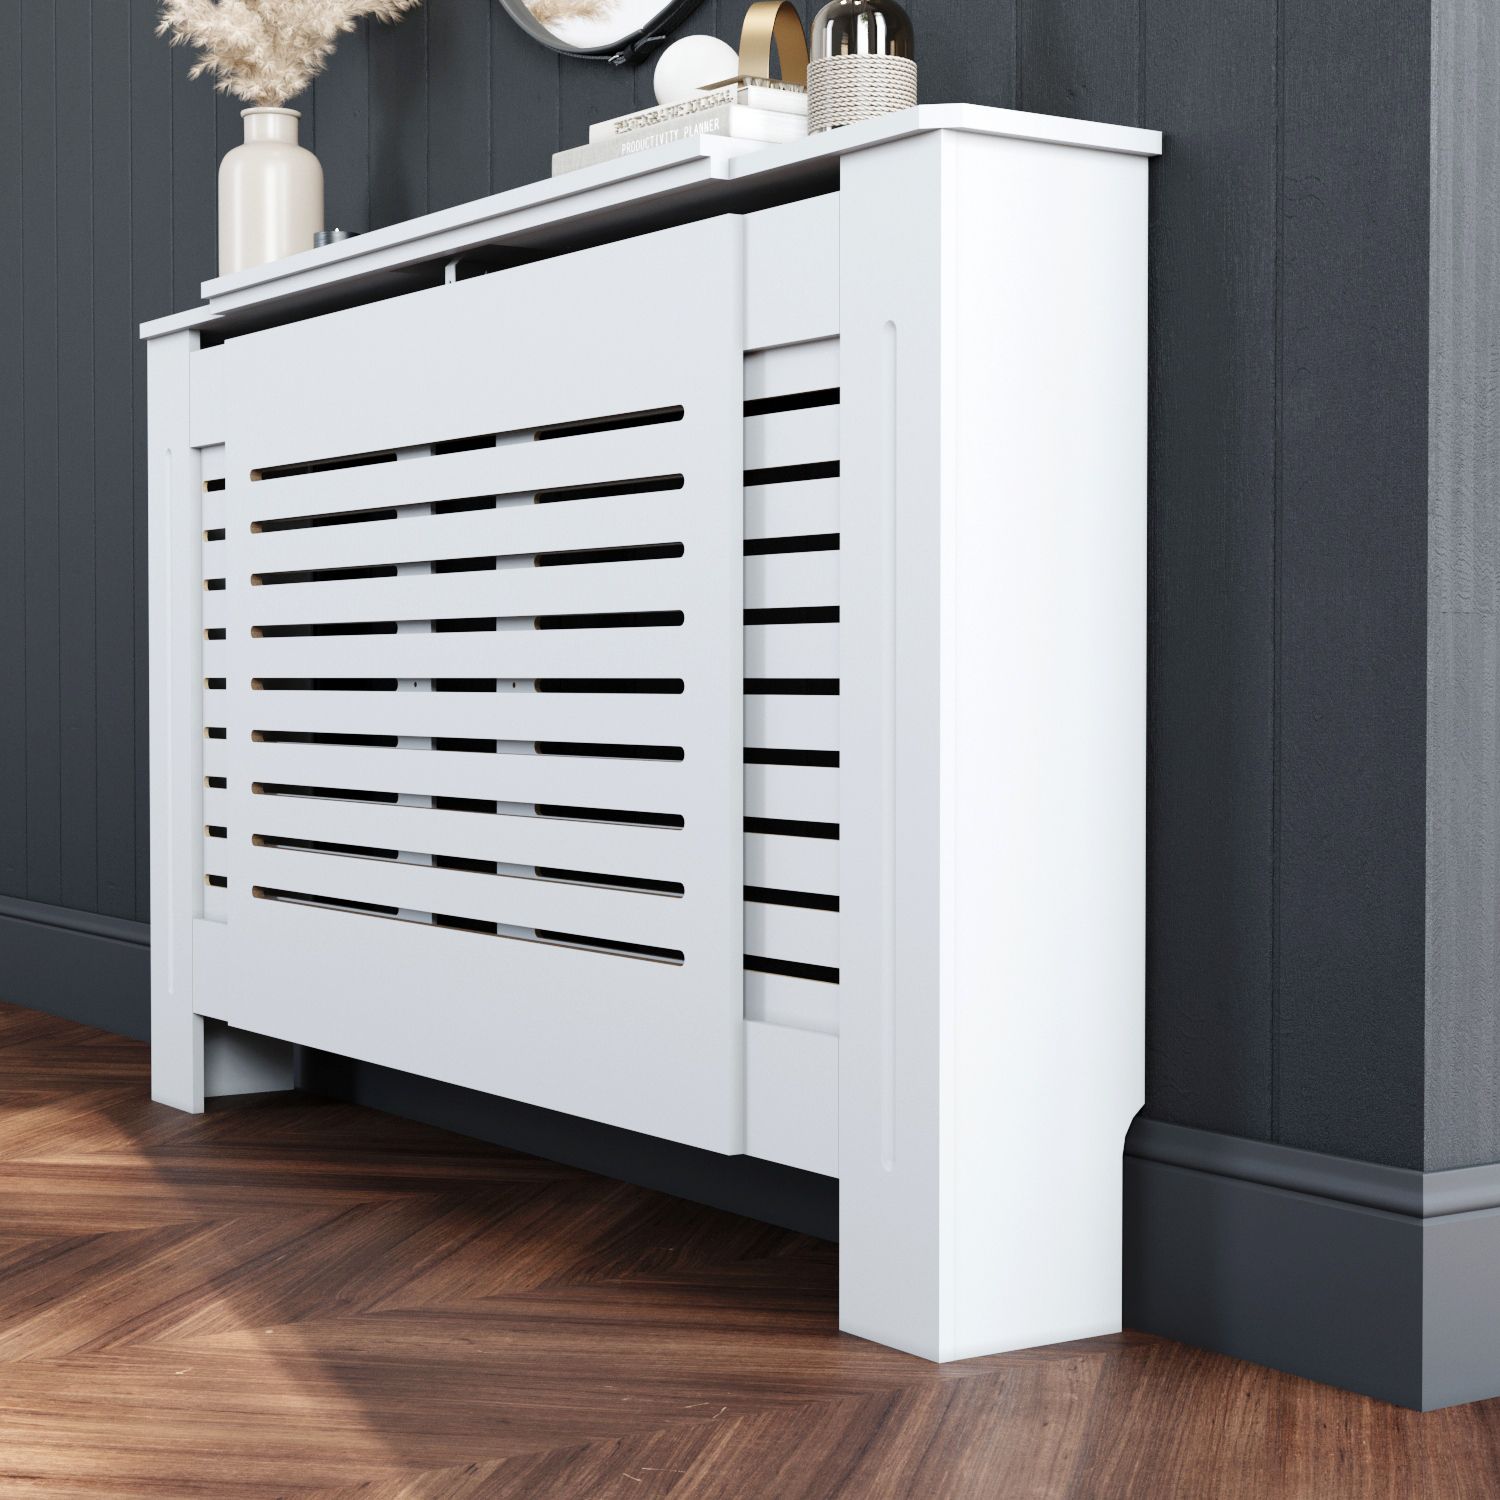 White Radiator Cover Cabinet Furniture Mdf Wood Horizontal Throughout Radiator Cover Tv Stands (View 14 of 15)